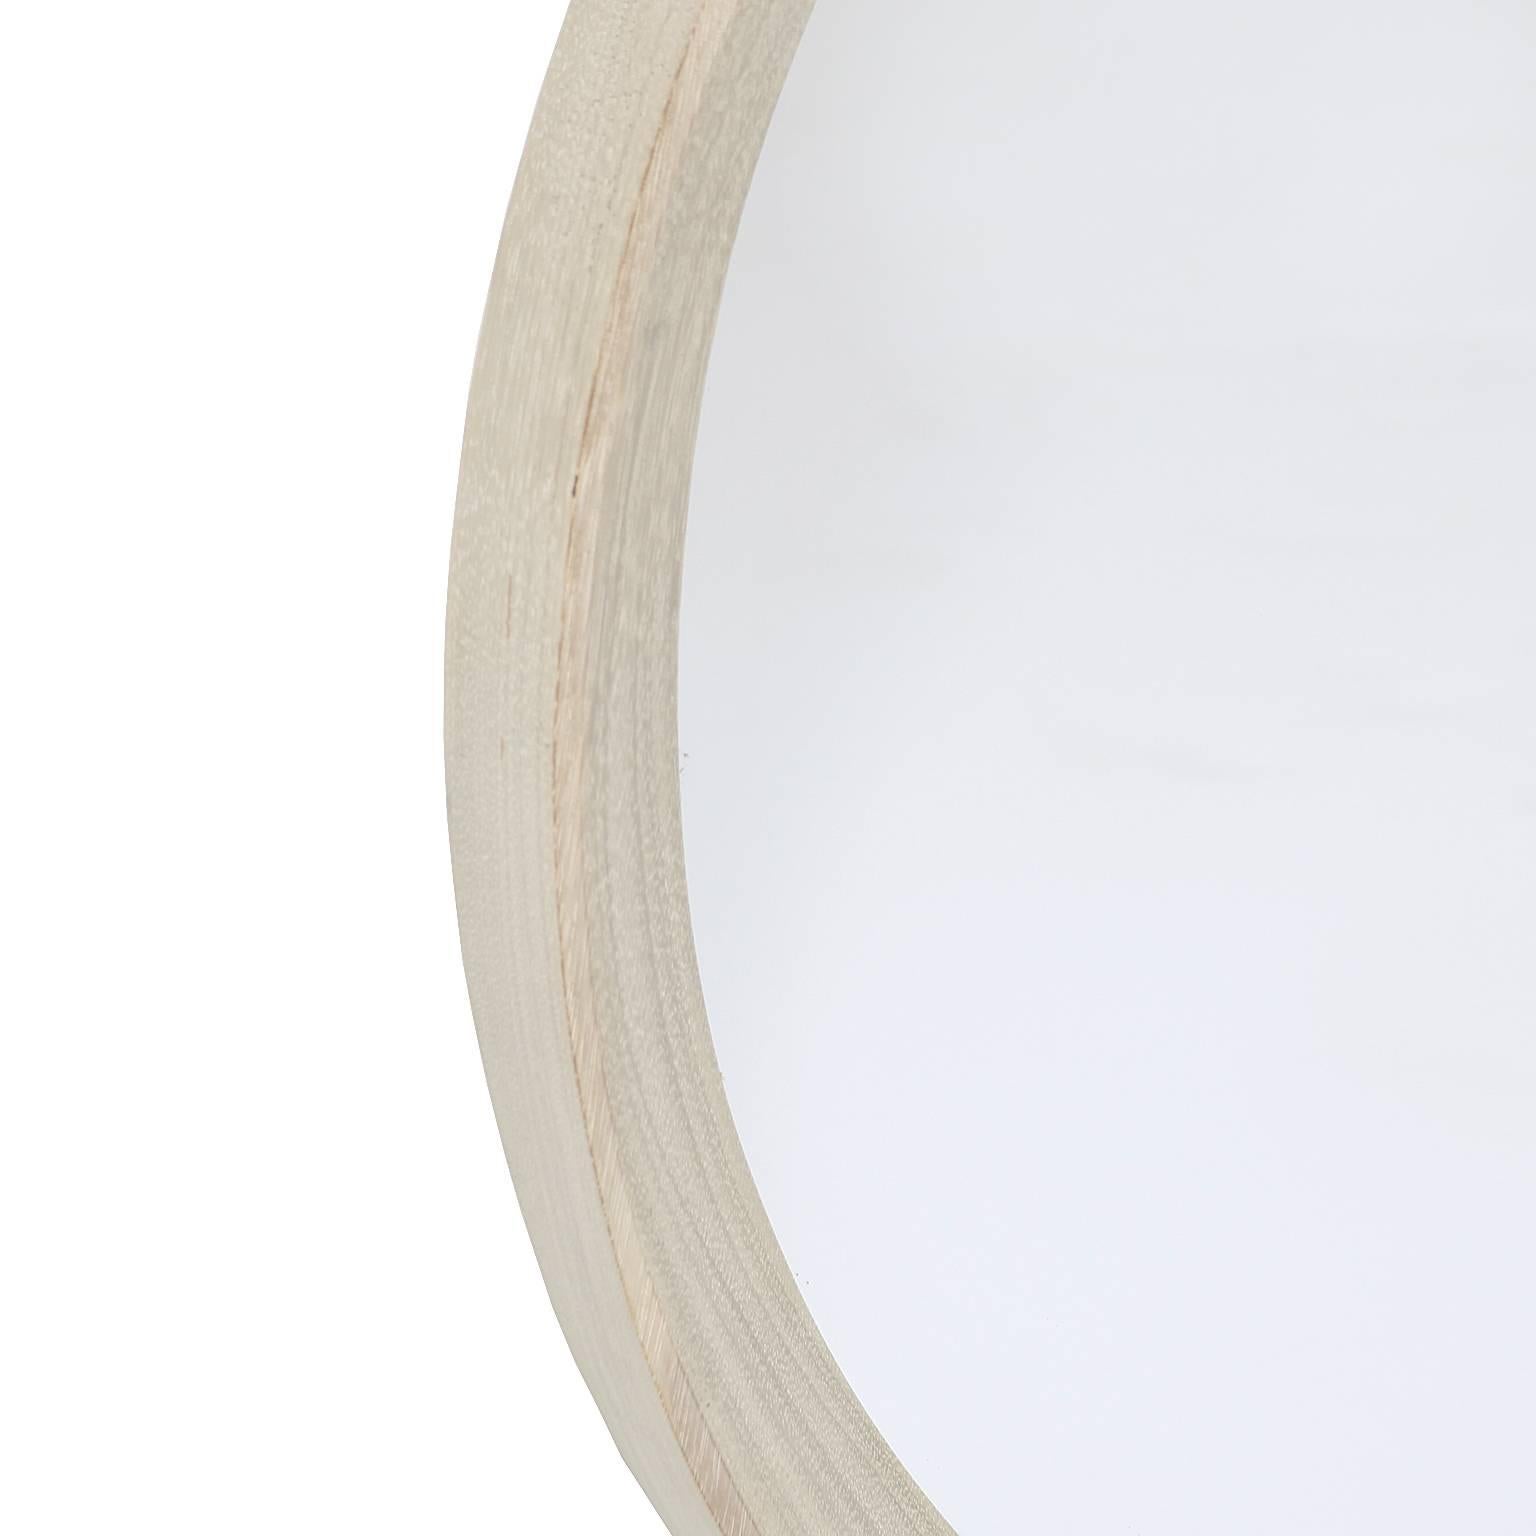 Mid-20th Century Organic Modern Brazilian Imbuia Mirror with Bleached White Oil Finish For Sale